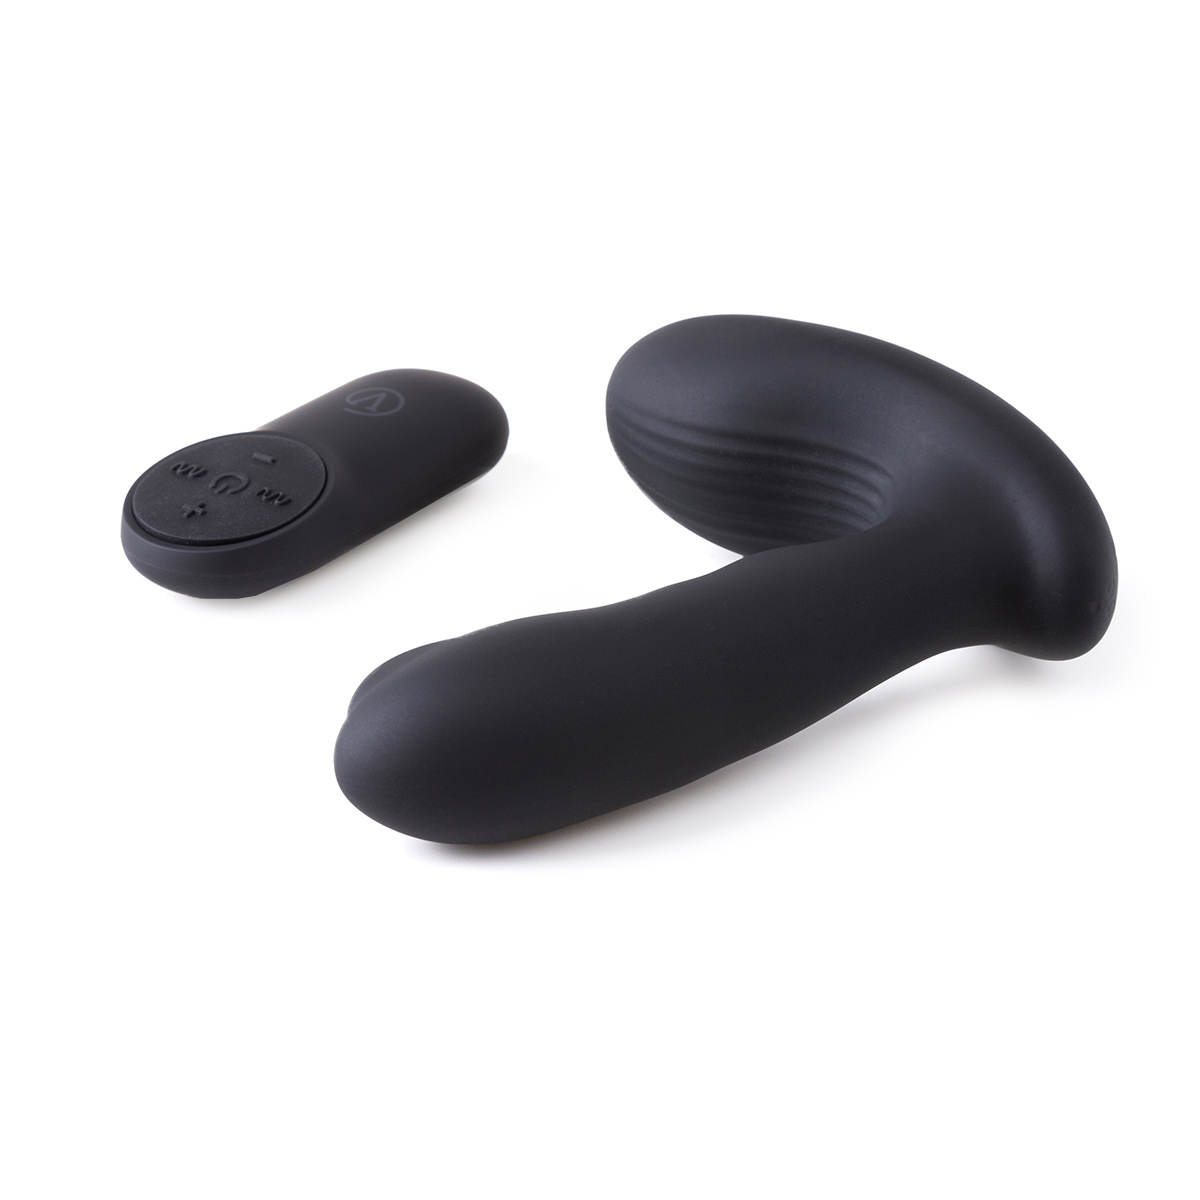 Moving-Beads-Prostate-Massager-with-Remote-P3-OPR-3090100-1